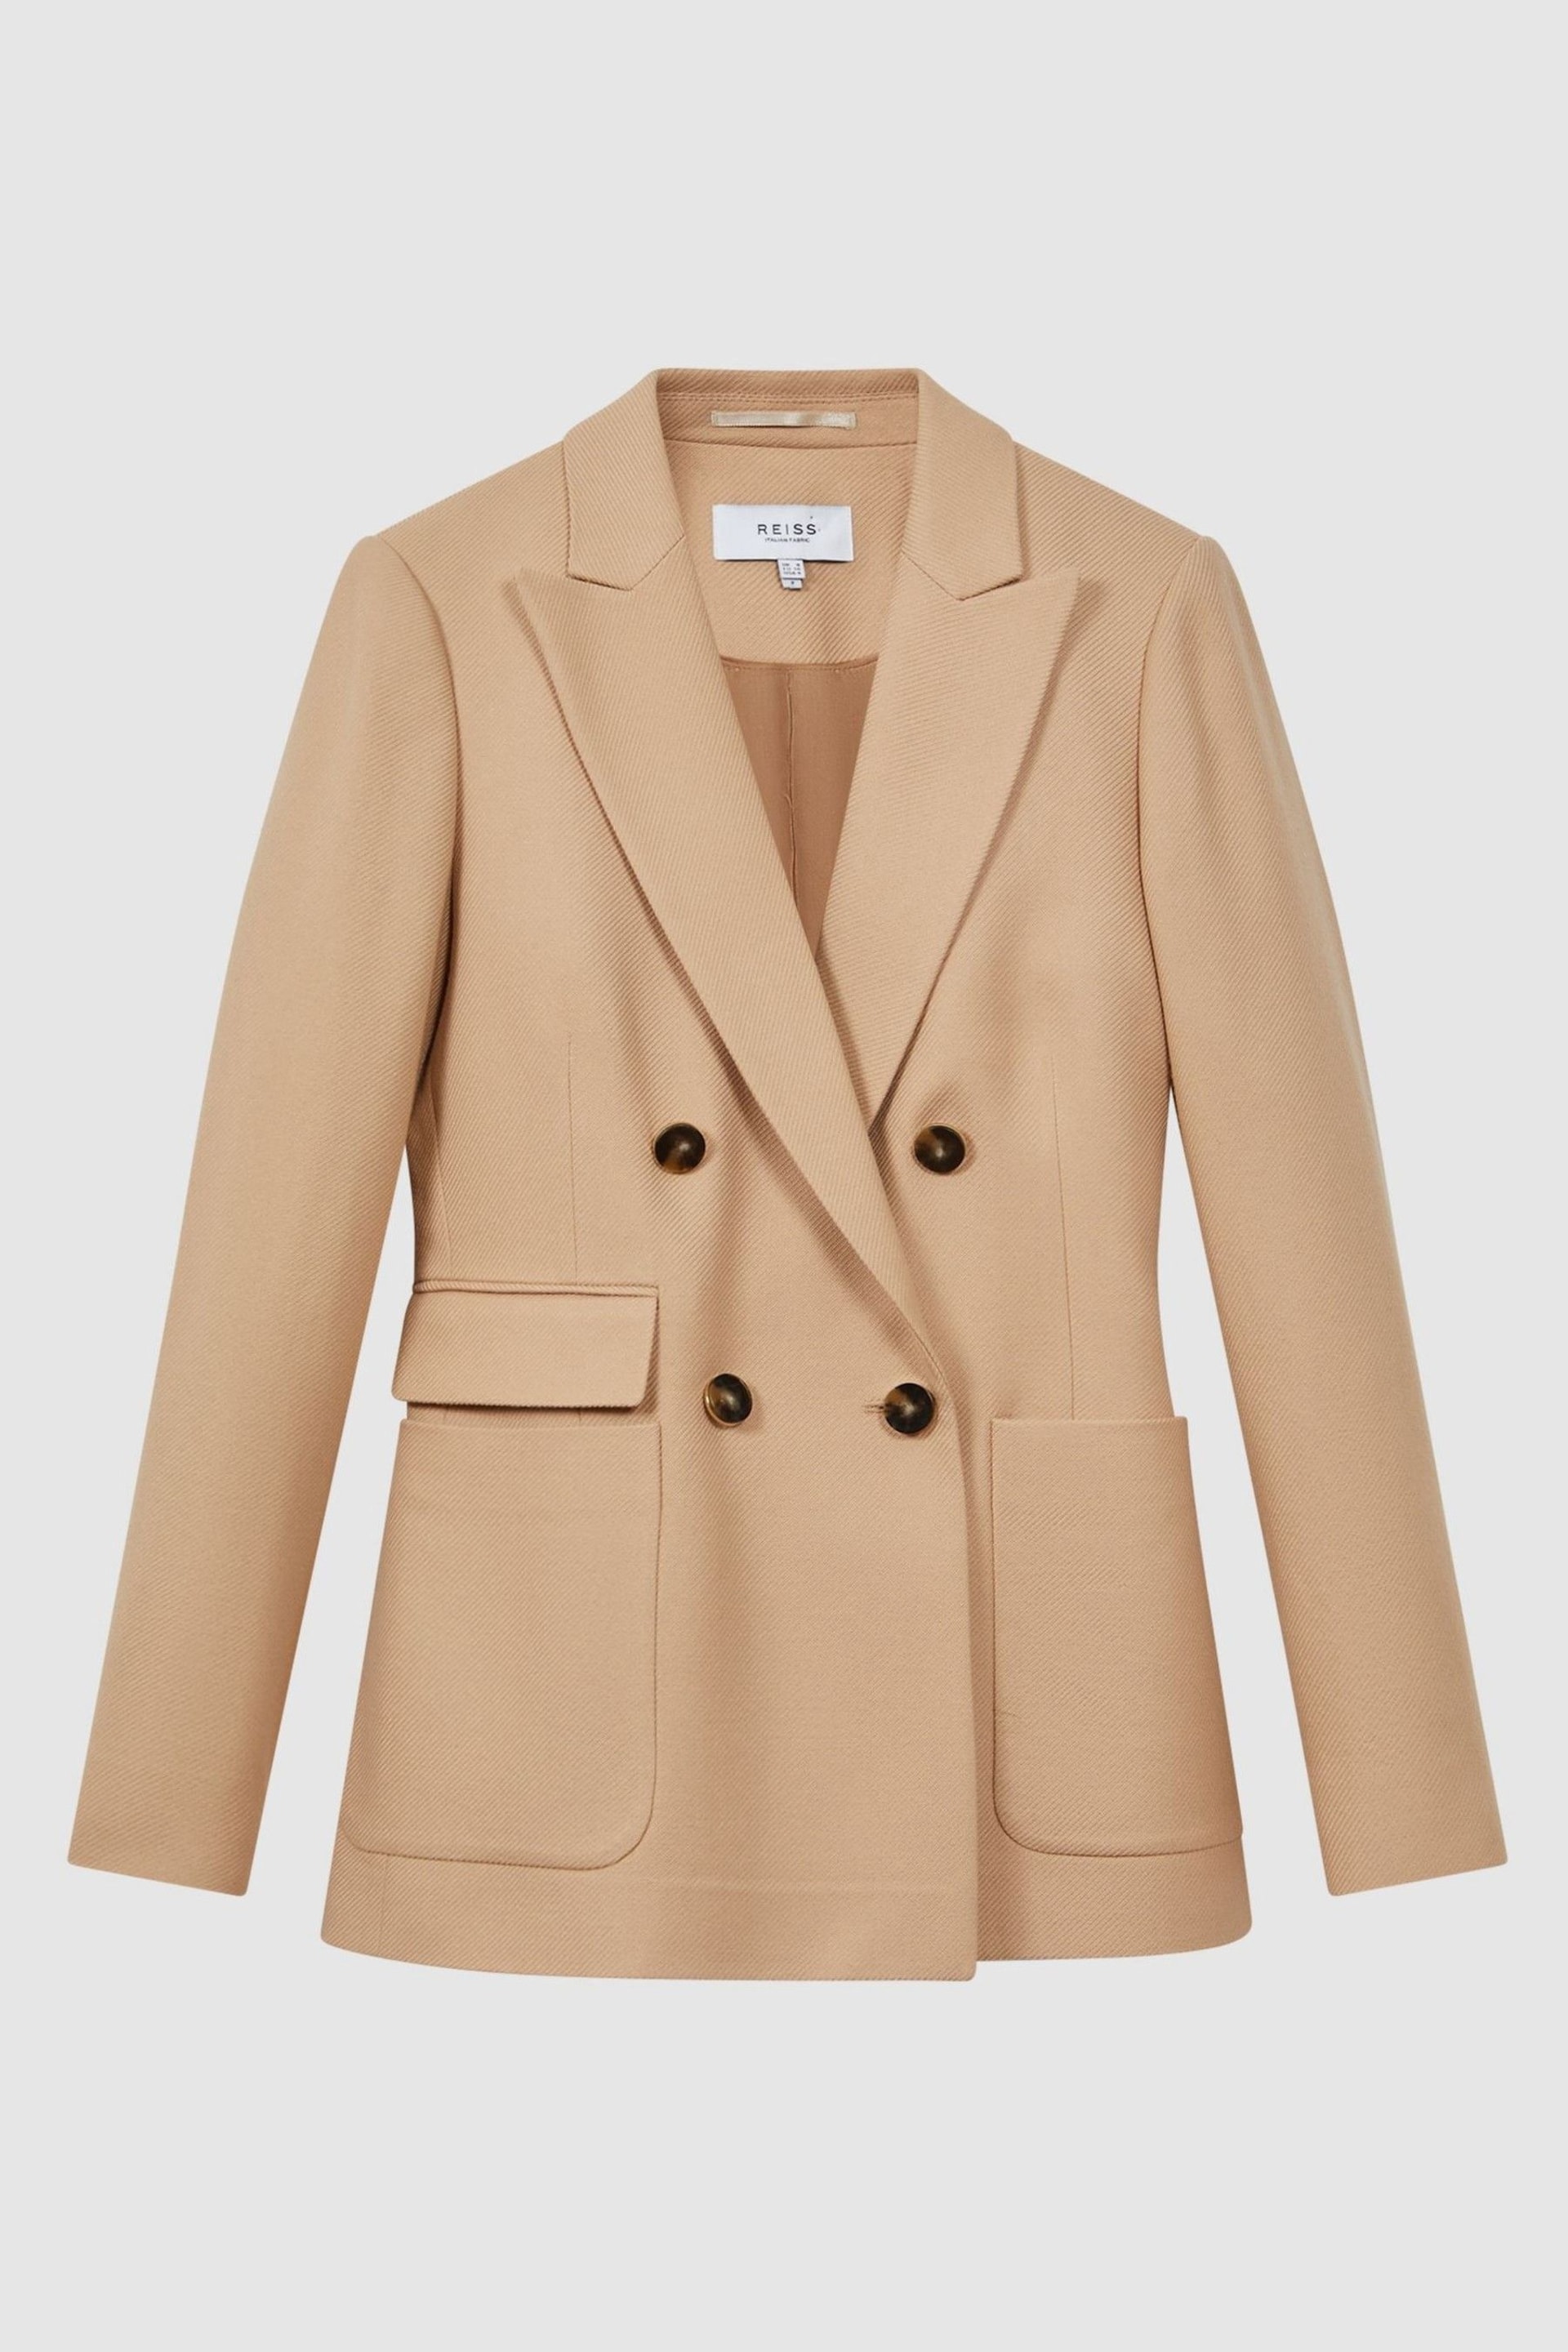 Reiss Light Camel Larsson Petite Double Breasted Twill Blazer - Image 2 of 7